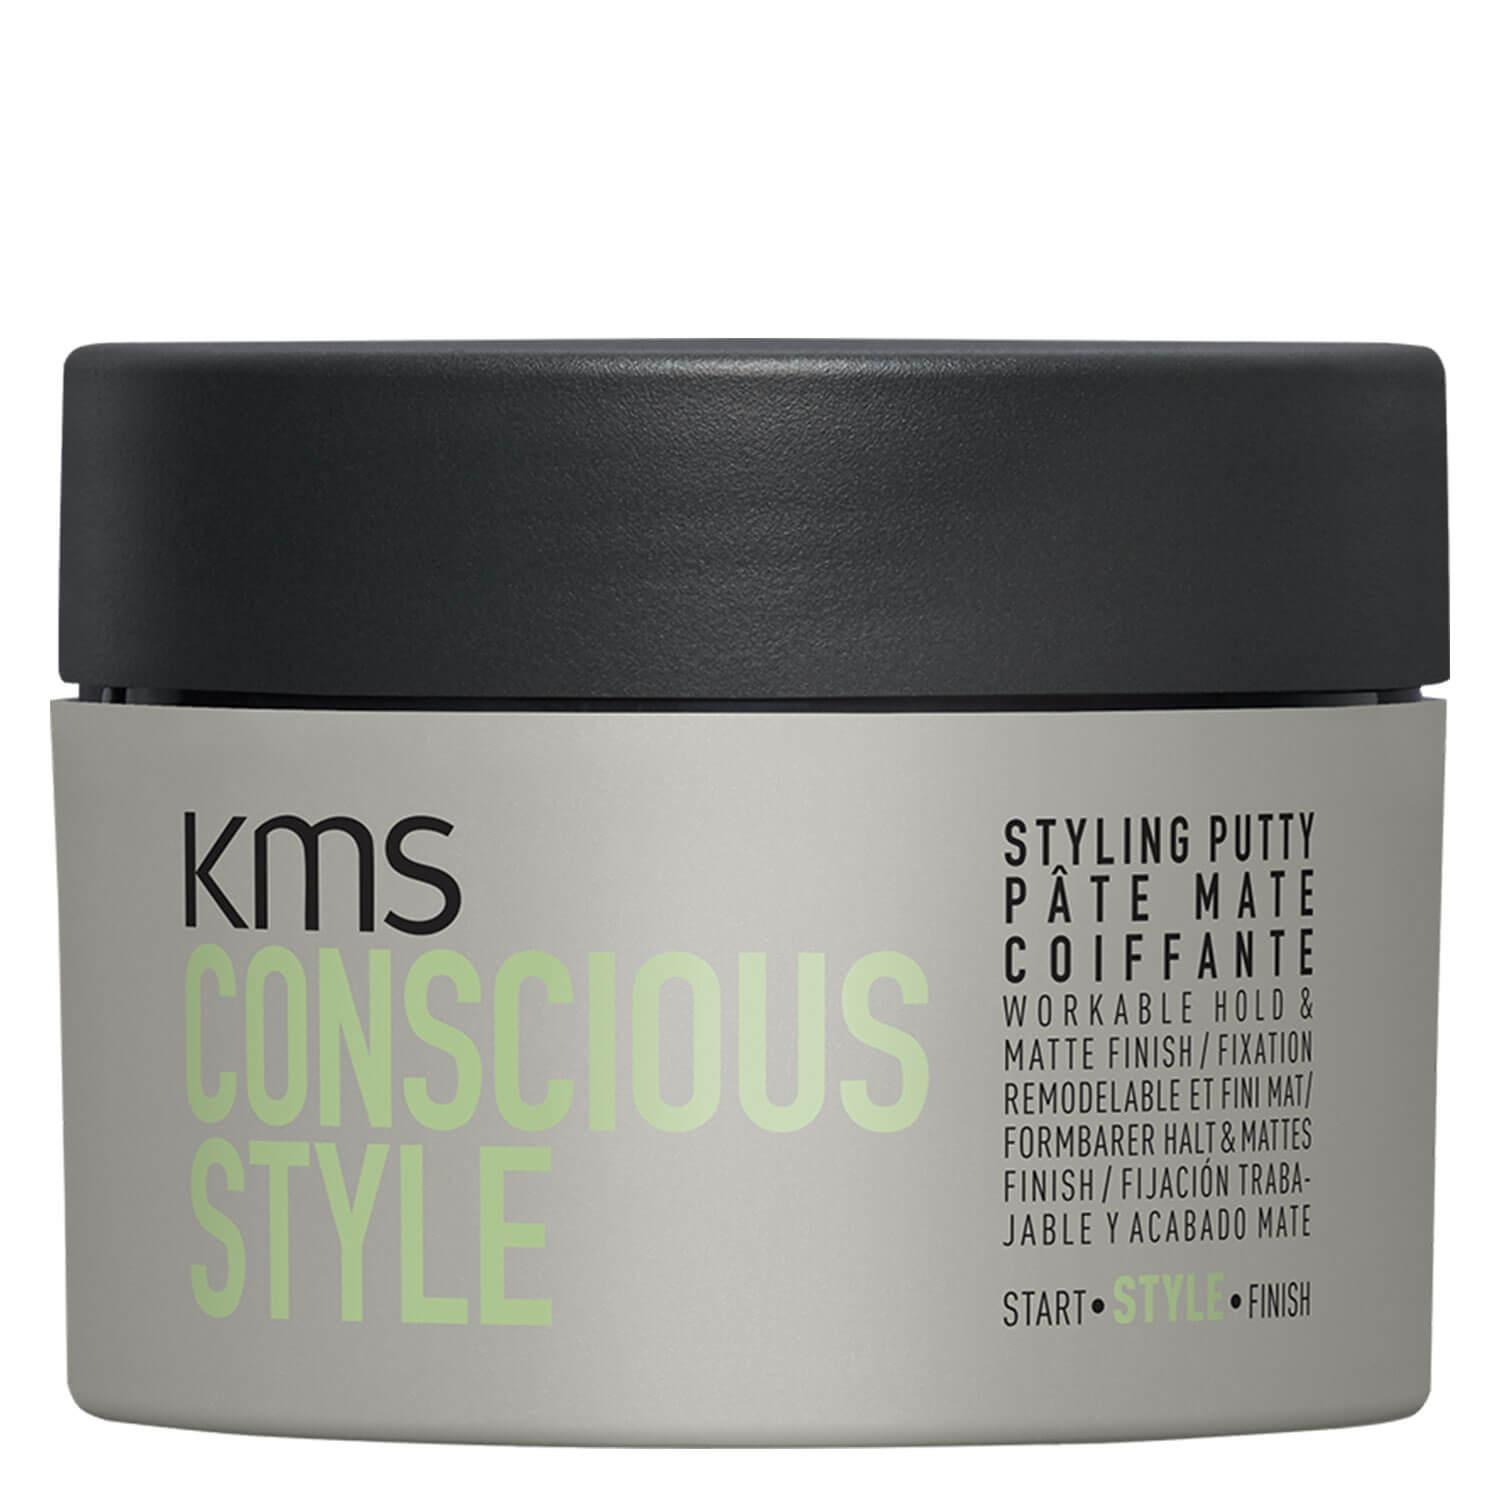 Consciousstyle - Styling Putty